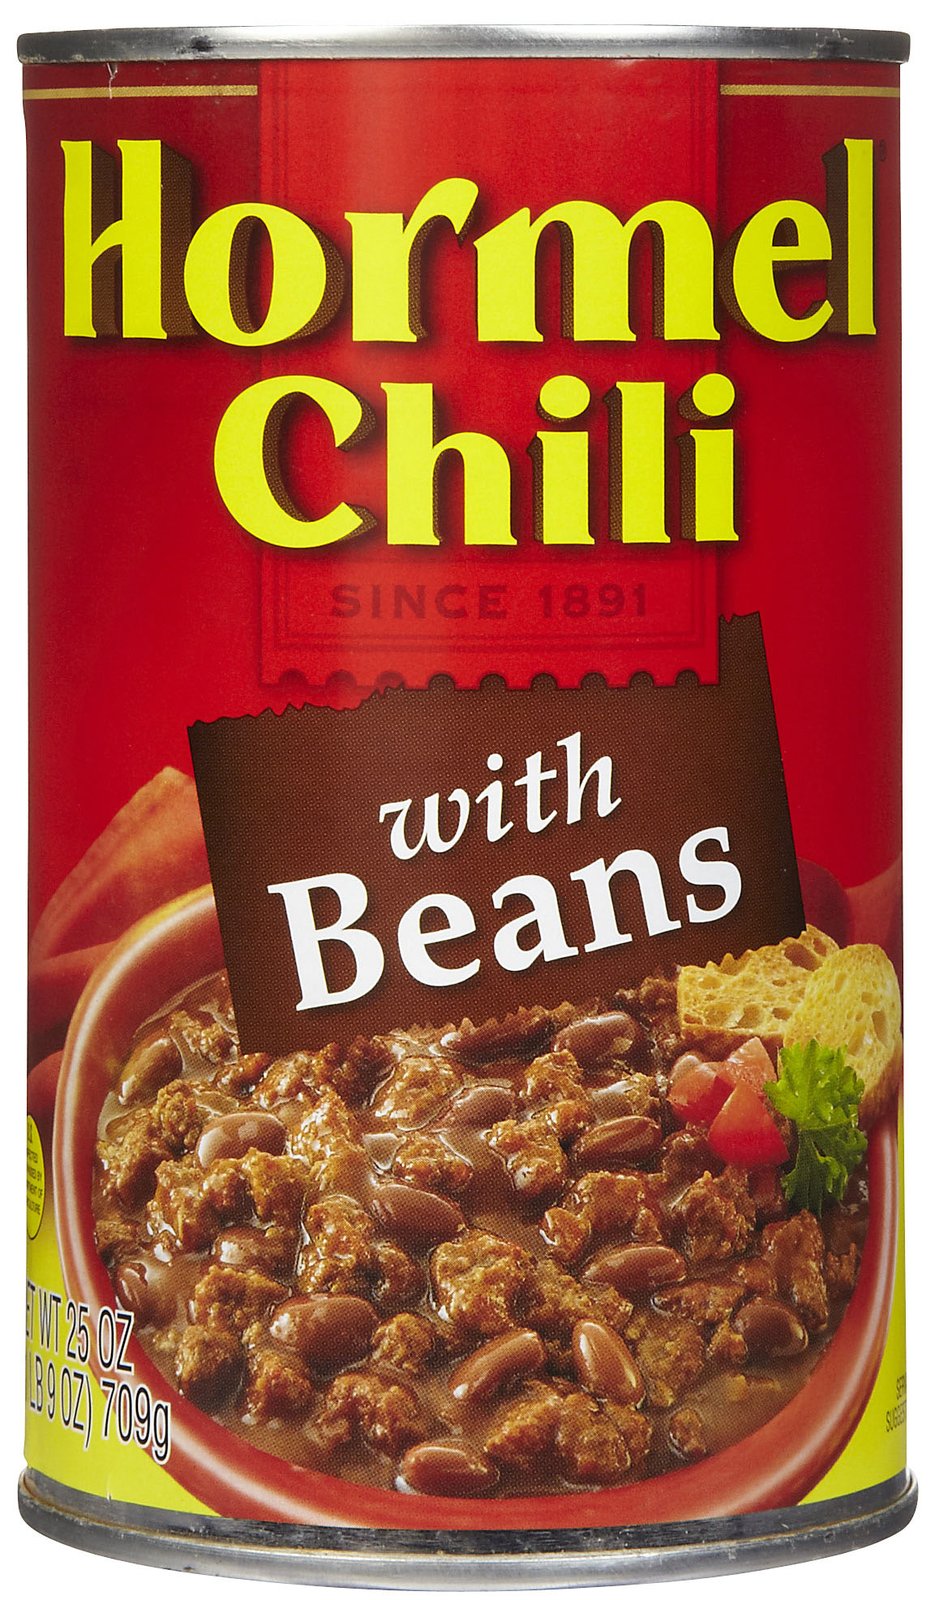 Hormel Chili Only $0.70 at Target